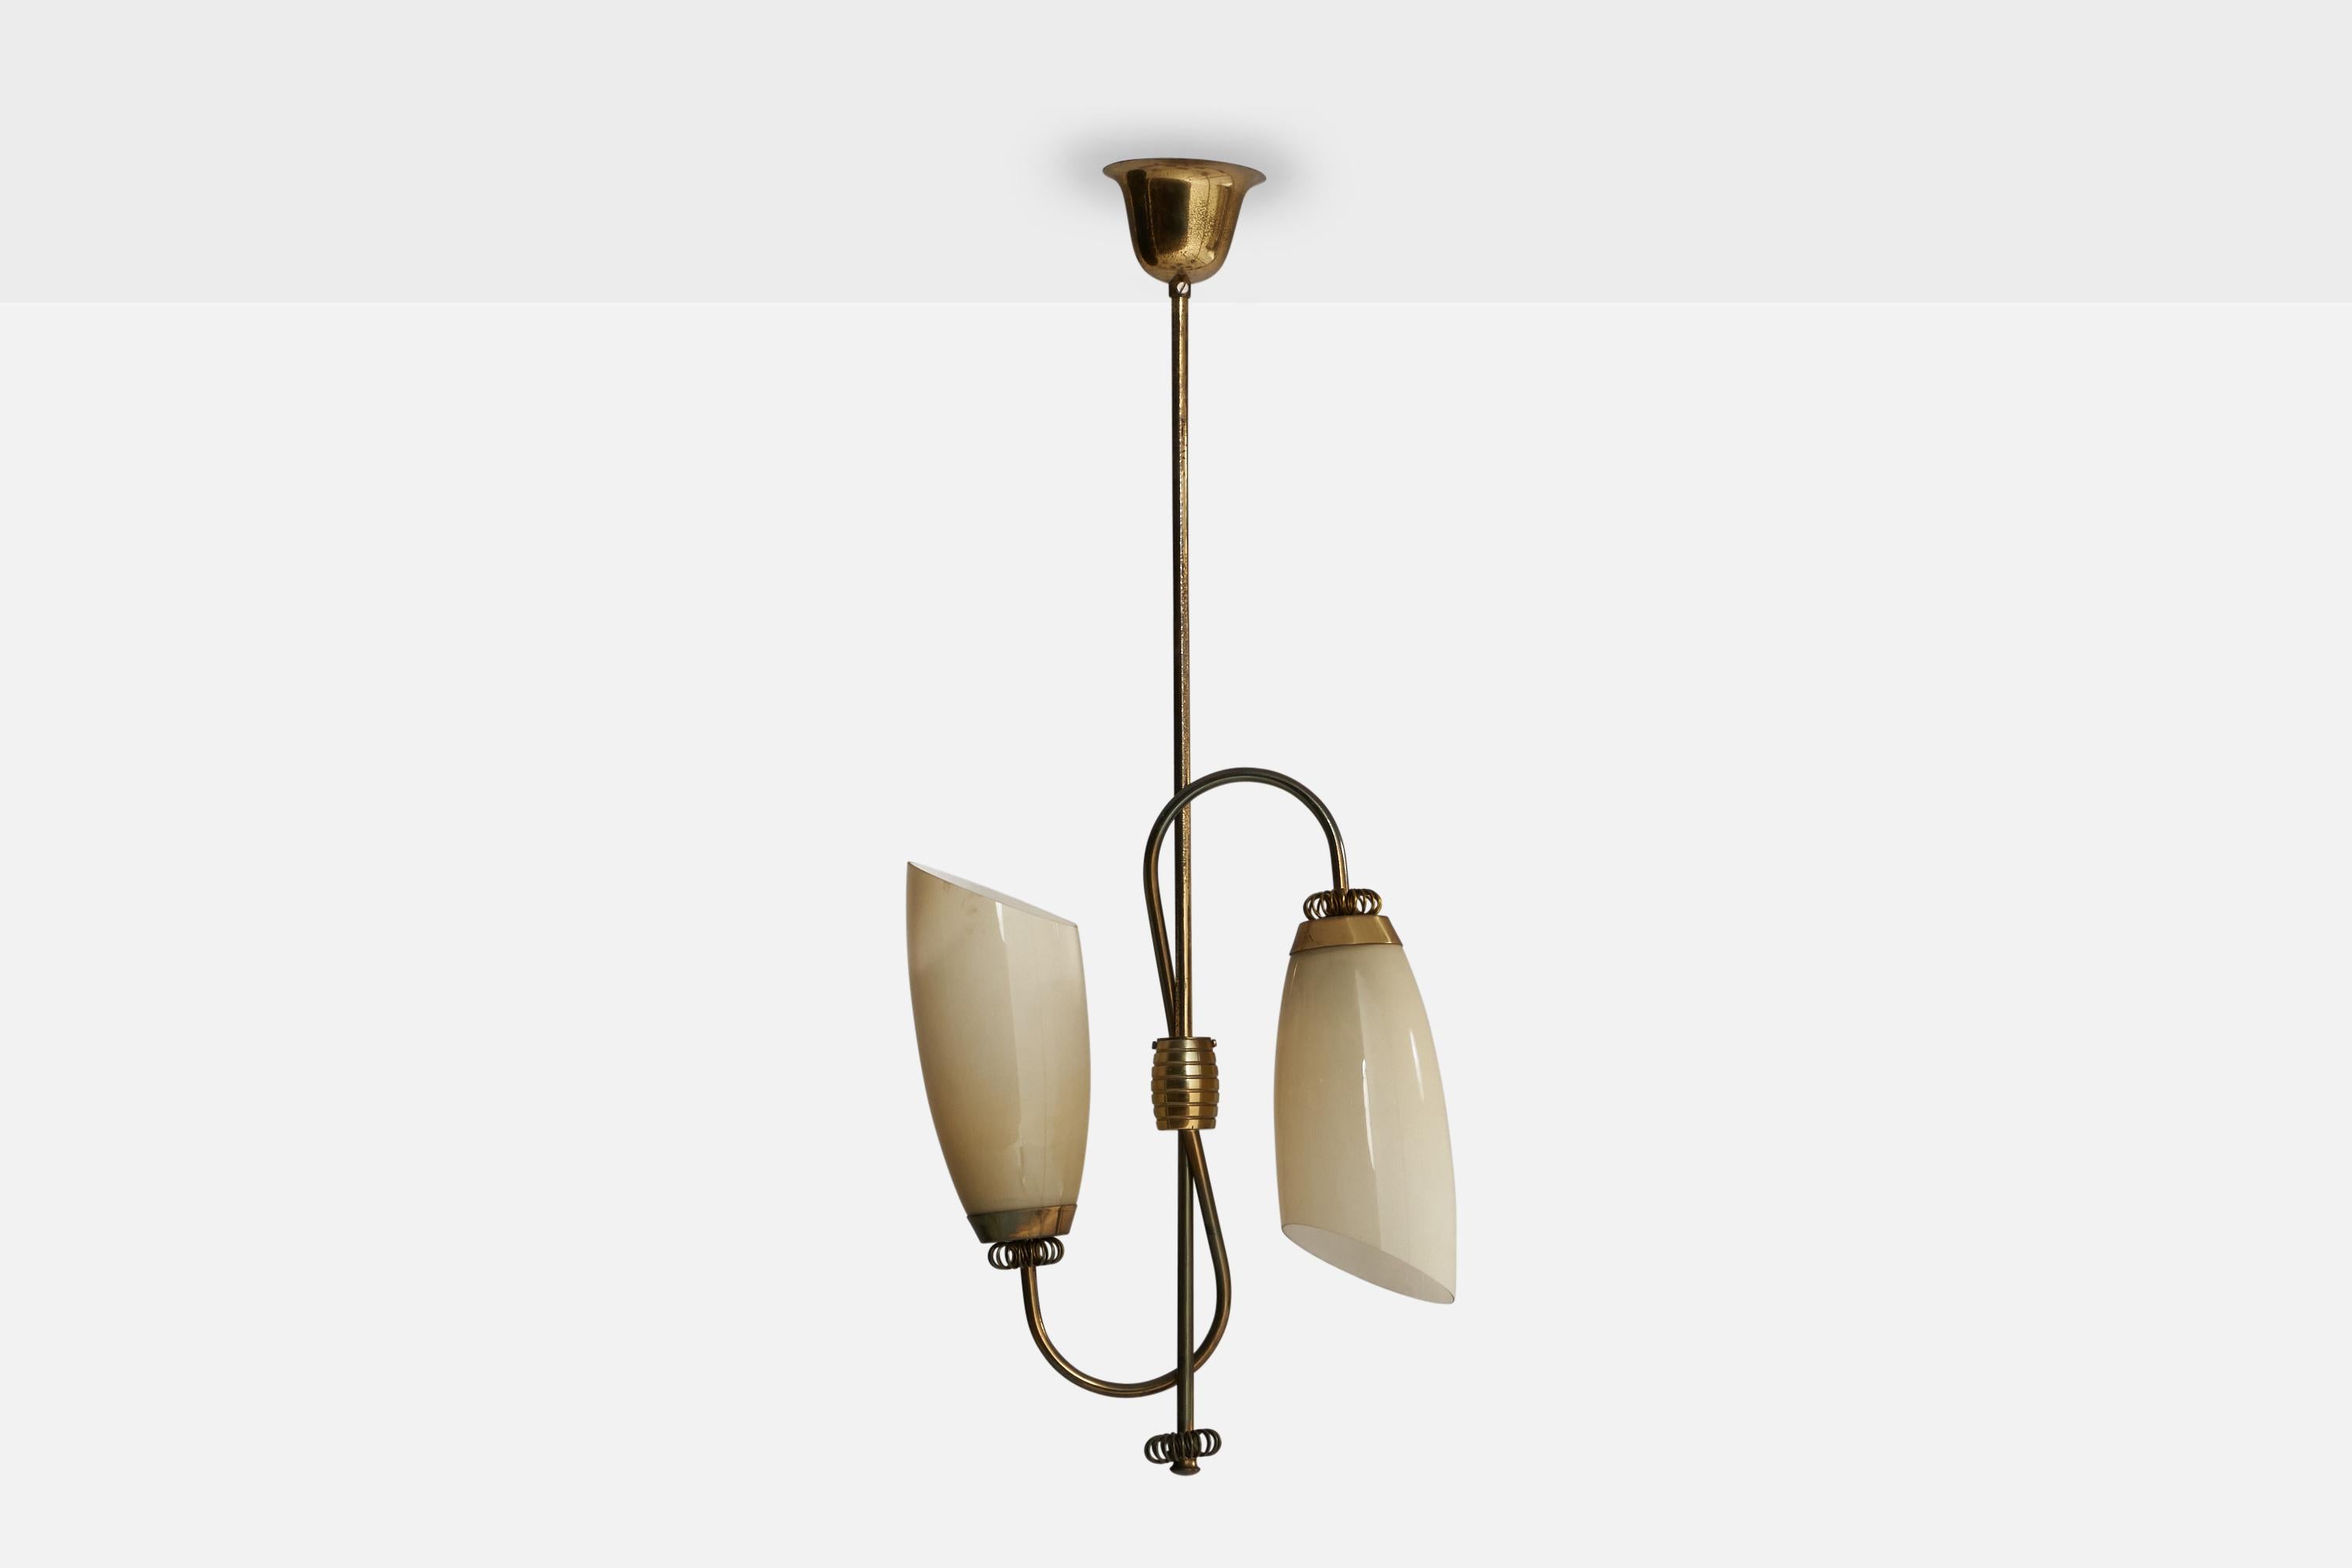 A brass and off-white opaline glass pendant light designed and produced in Finland, c. 1940s.

Dimensions of canopy (inches): 2.8” H x 3.82” Diameter
Socket takes standard E-26 bulbs. 2 sockets.There is no maximum wattage stated on the fixture. All